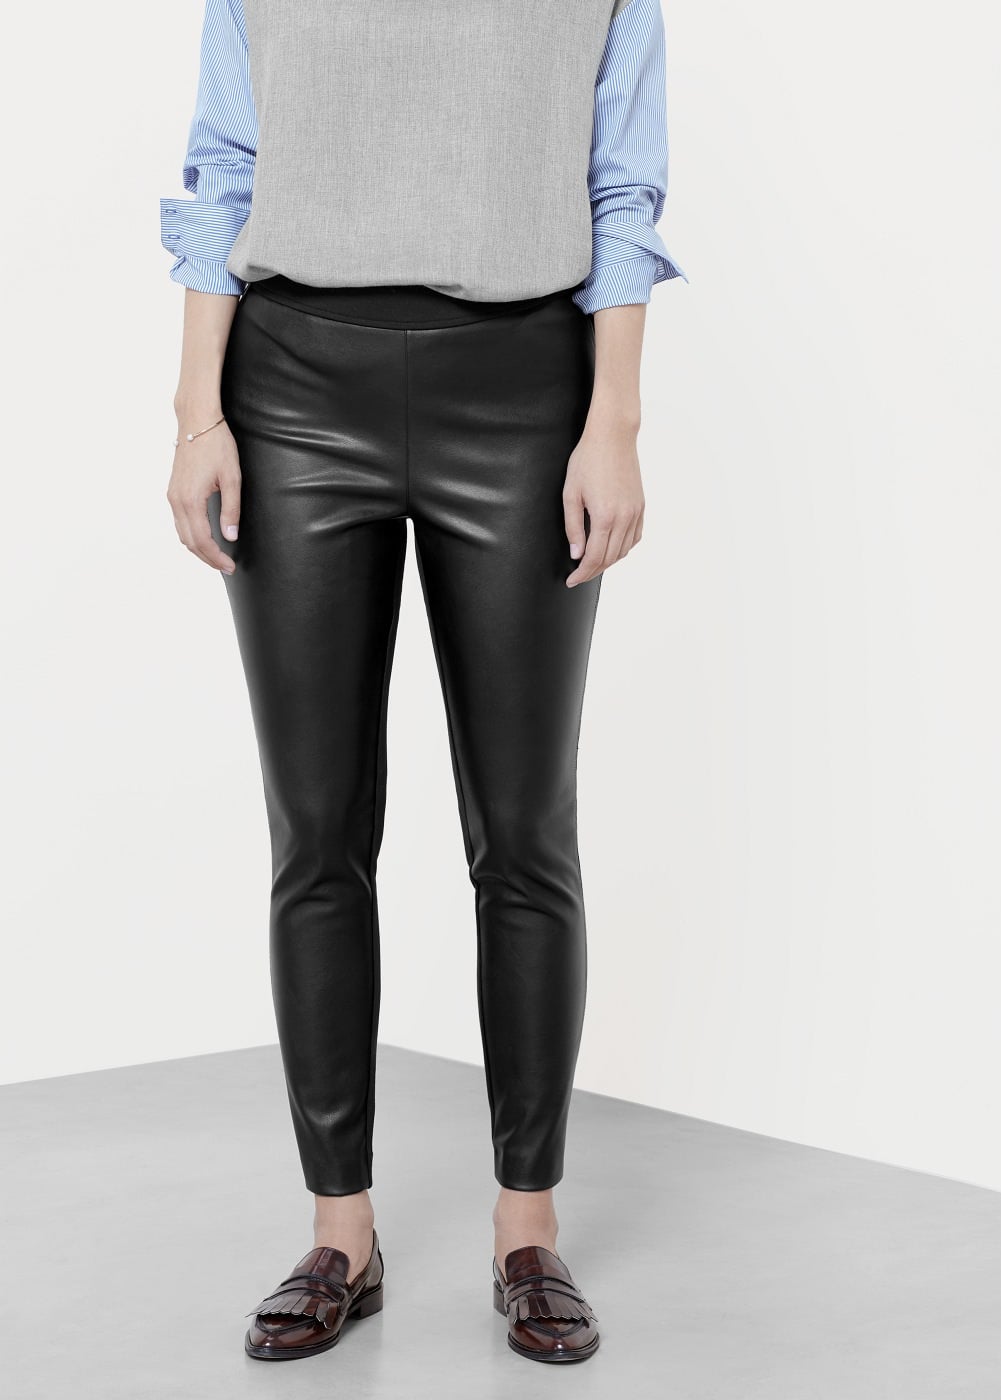 Guau suspicaz Orientar Violeta BY MANGO Panel Contrast Leggings ($60, originally $90) | If You're  Over Your Black Skinnies, Swap Them Out For These | POPSUGAR Fashion Photo  19